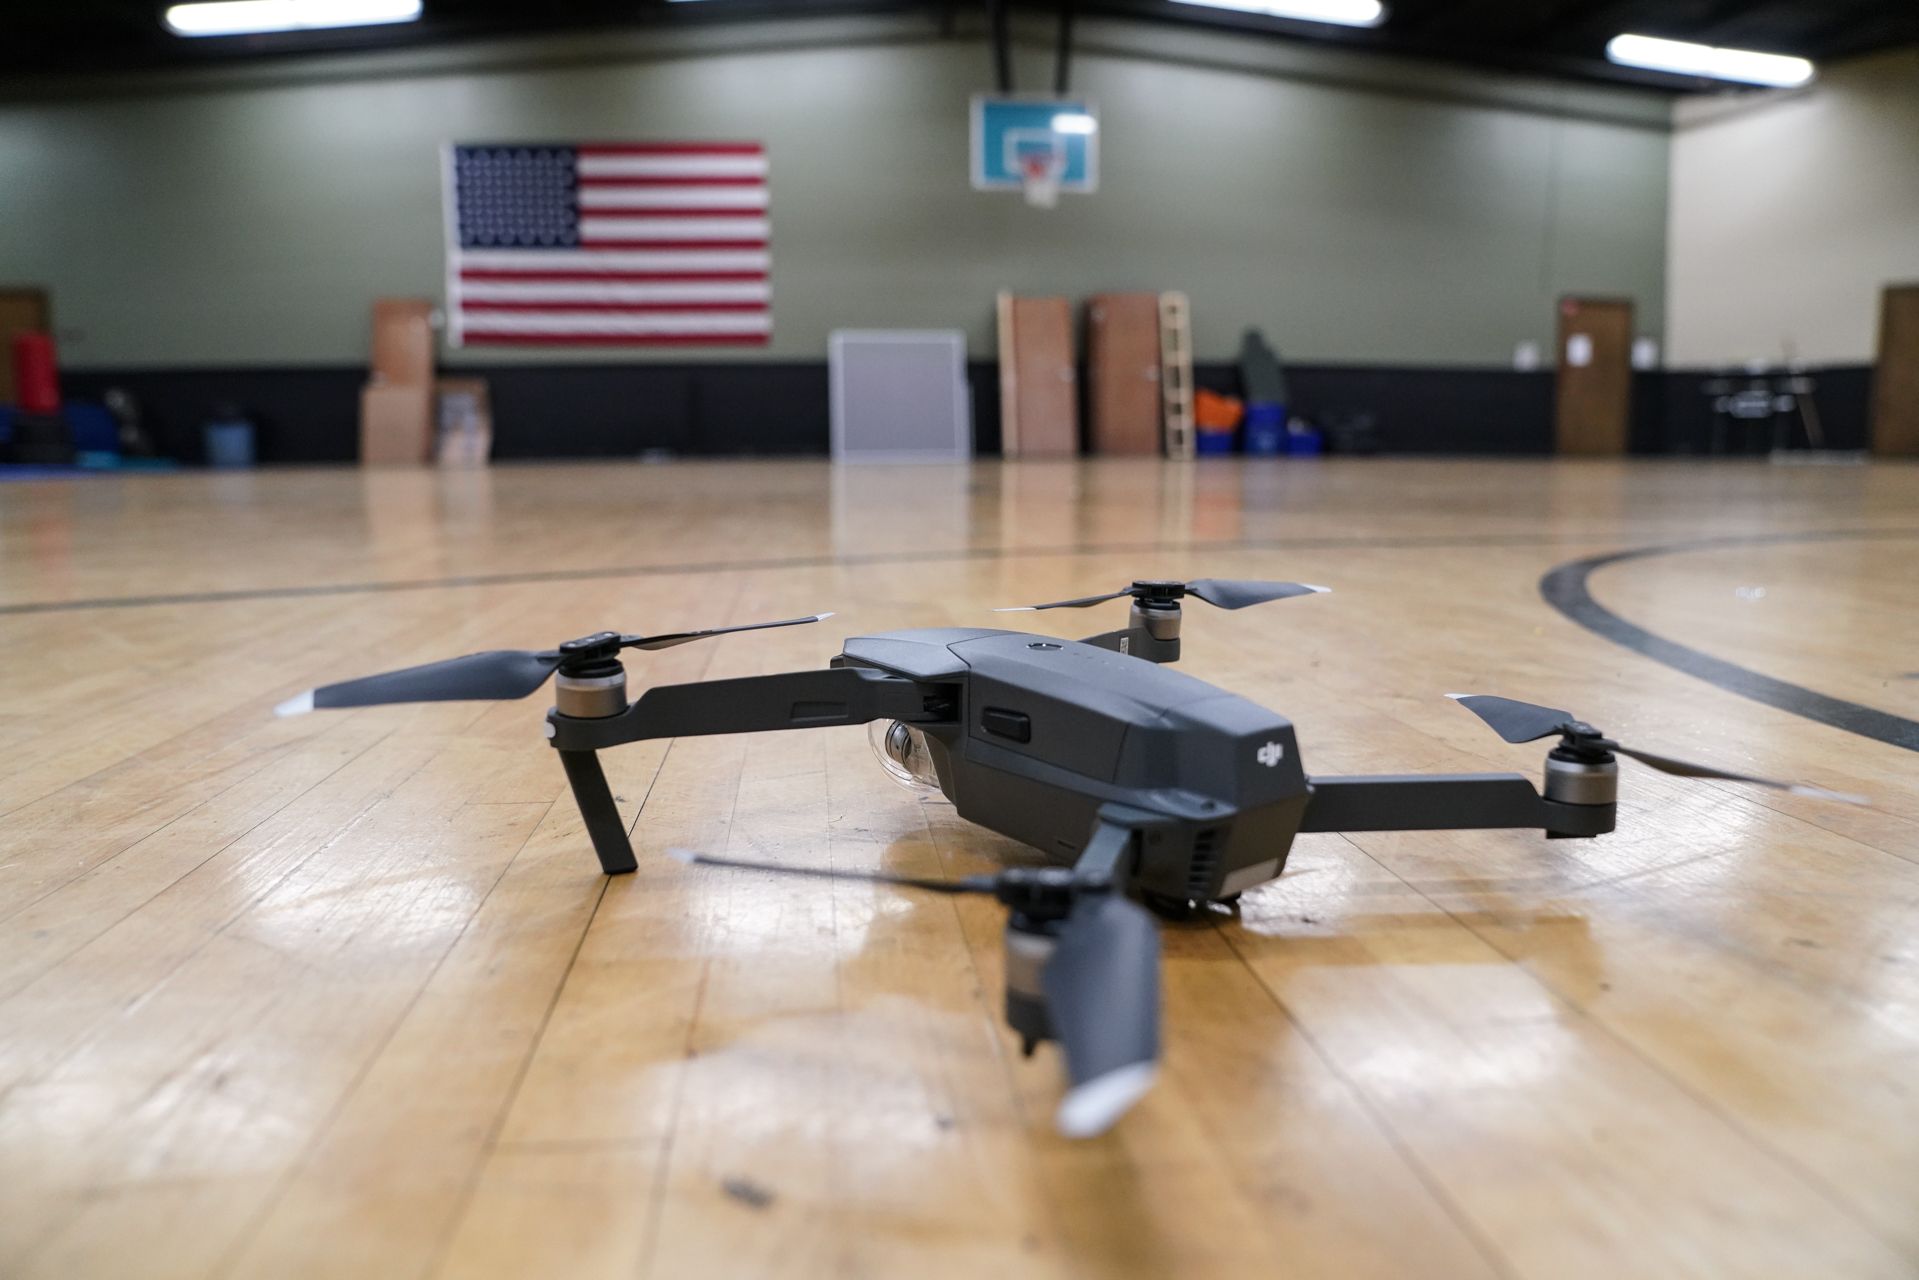 A Jeffersontown Police officer demonstrates flying the department’s DJI Mavic Pro drone in the police department gym. Image by J. Tyler Franklin. USA, 2019.